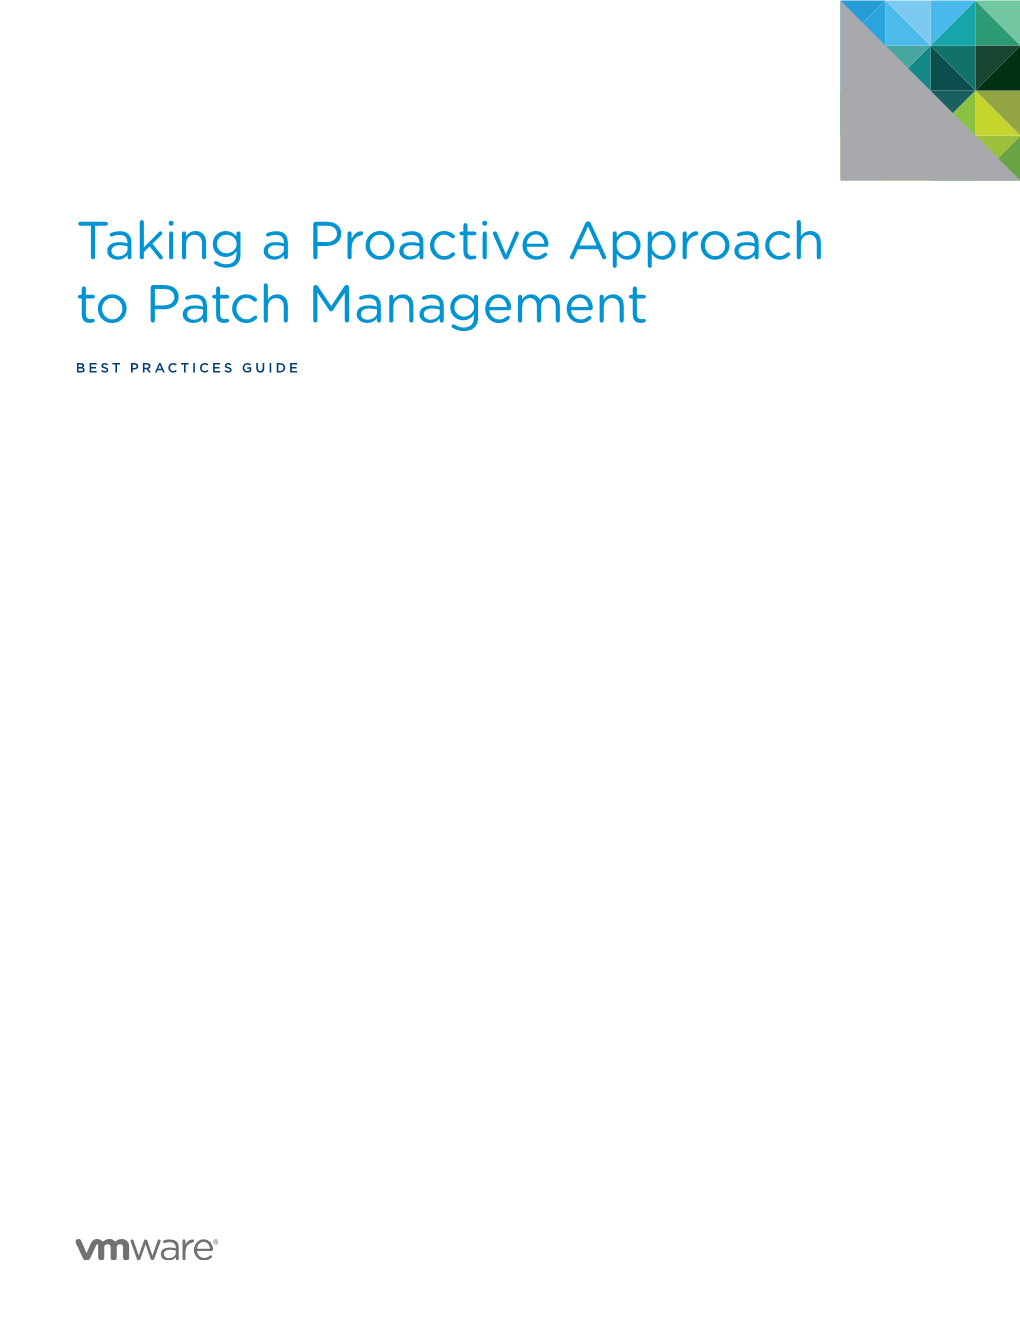 Taking a Proactive Approach to Patch Management